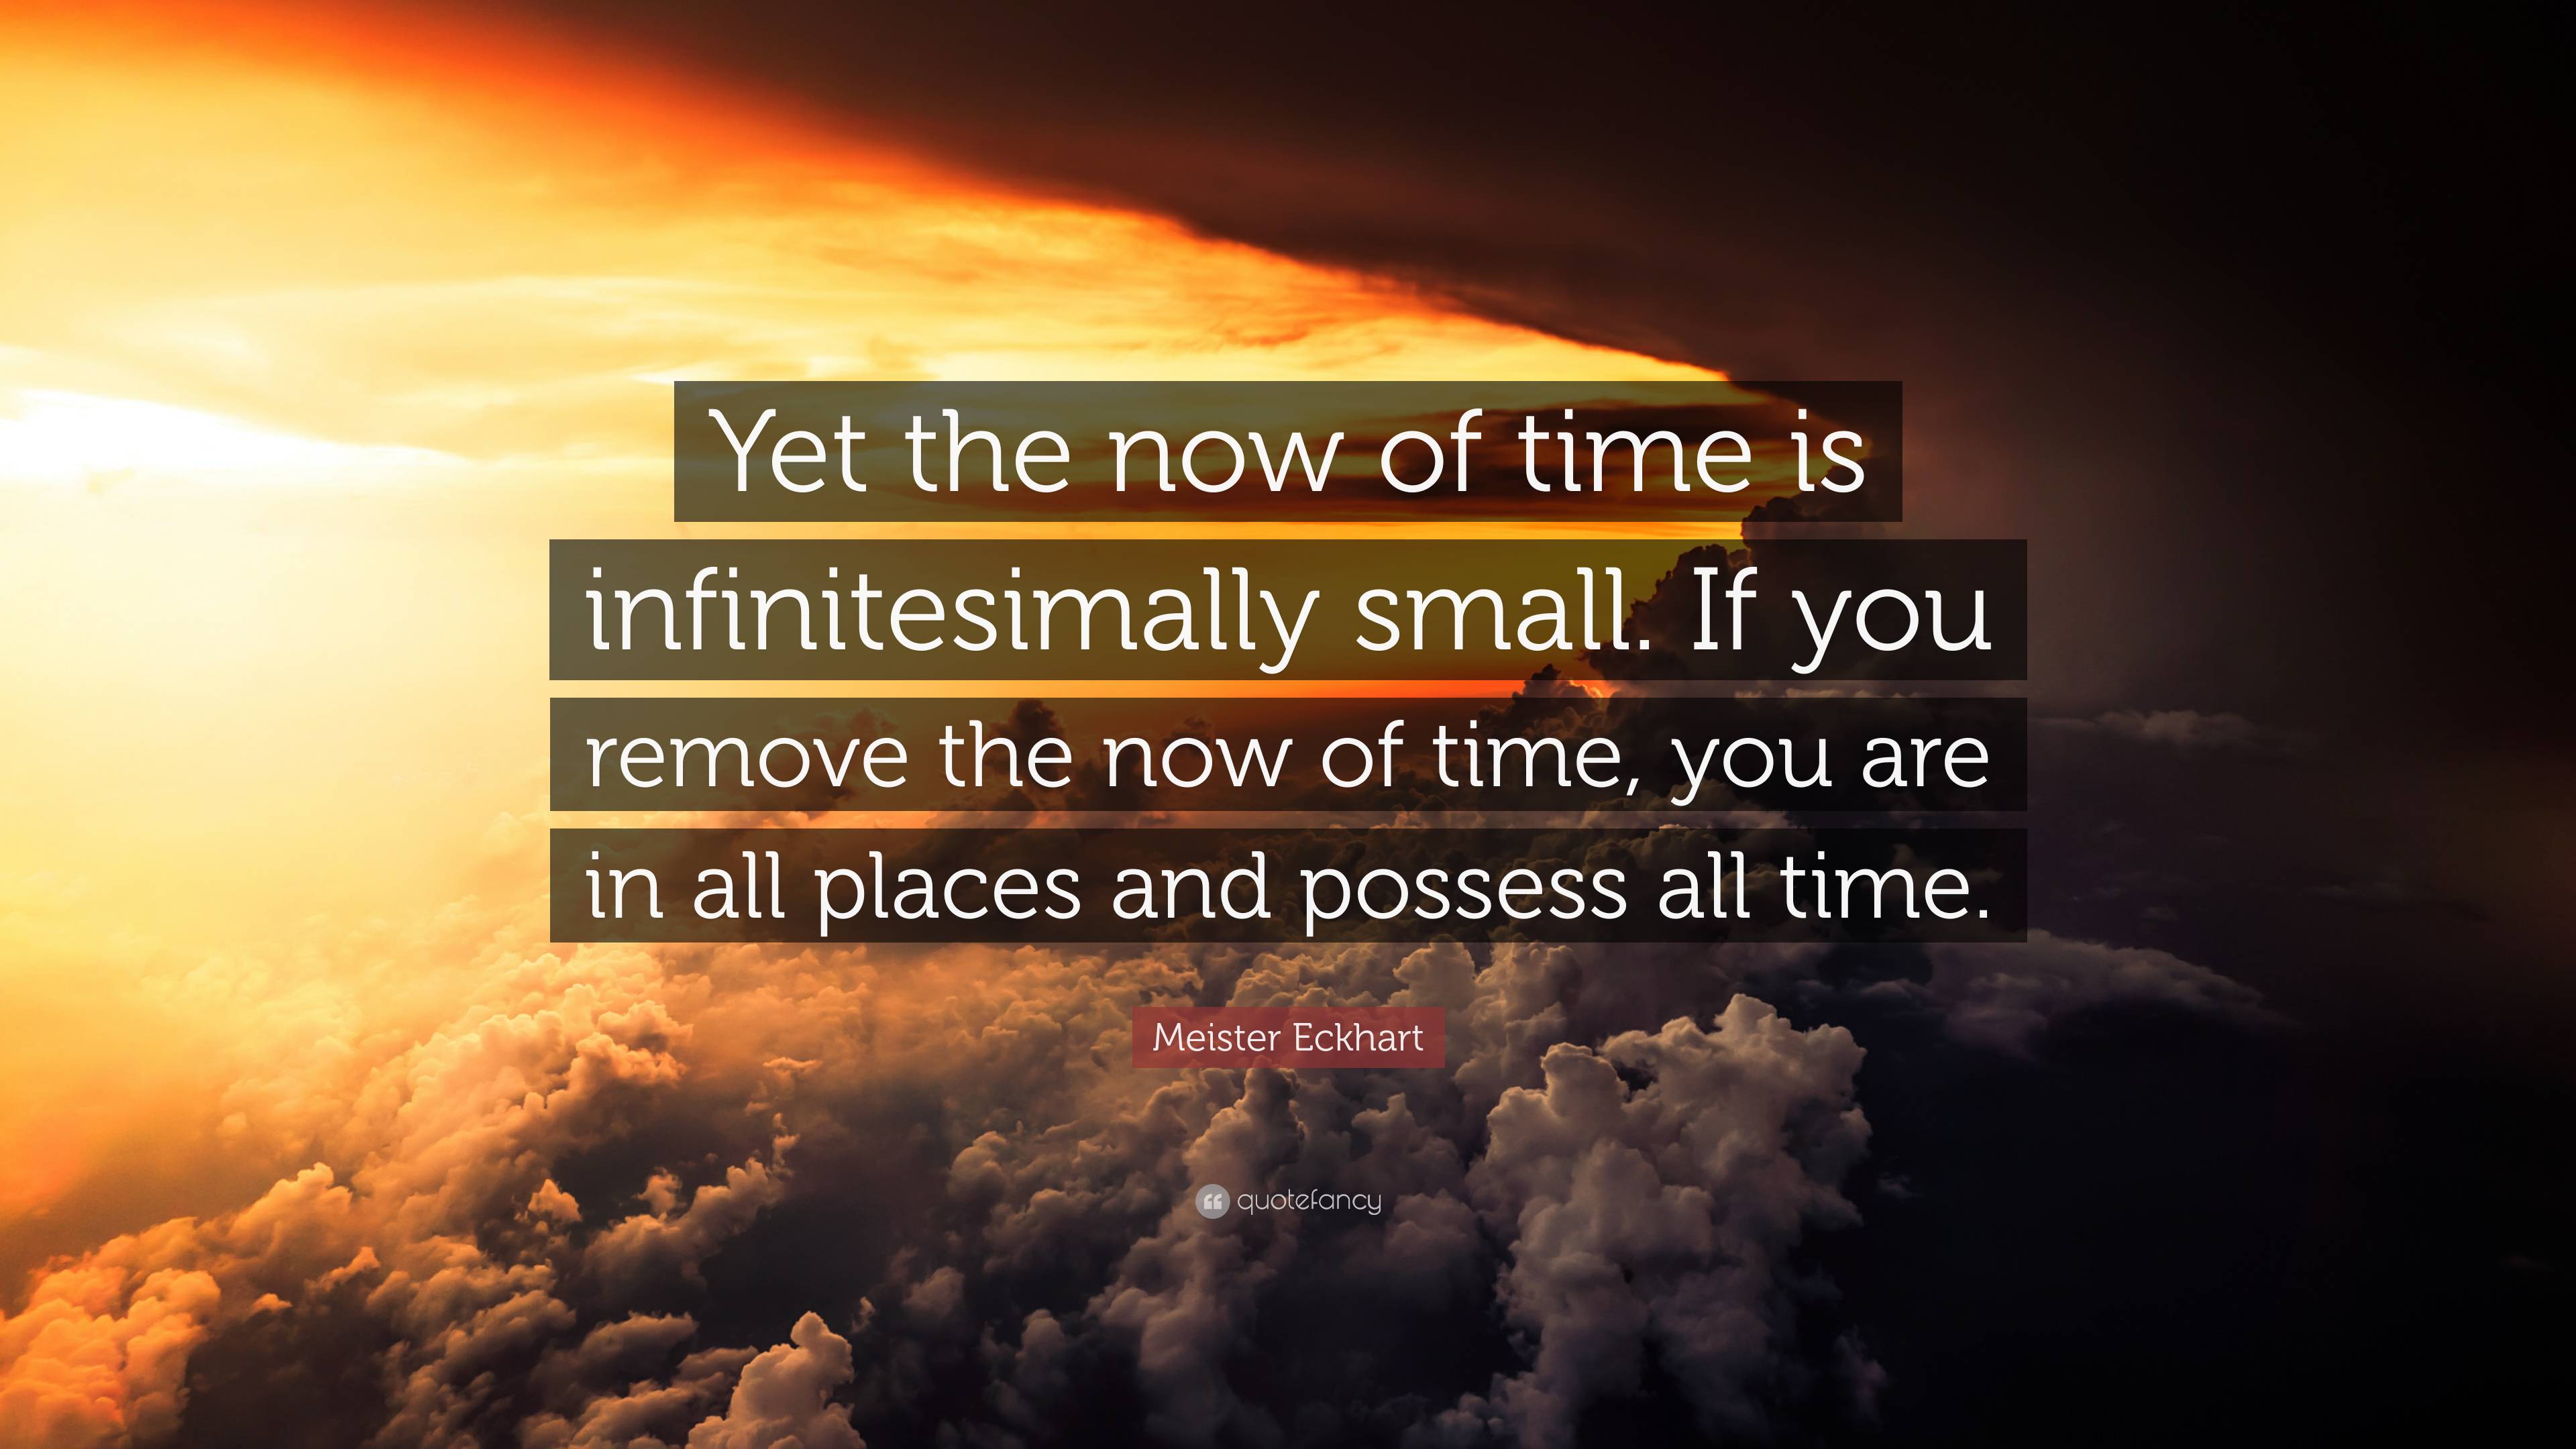 Meister Eckhart Quote: “Yet the now of time is infinitesimally small ...